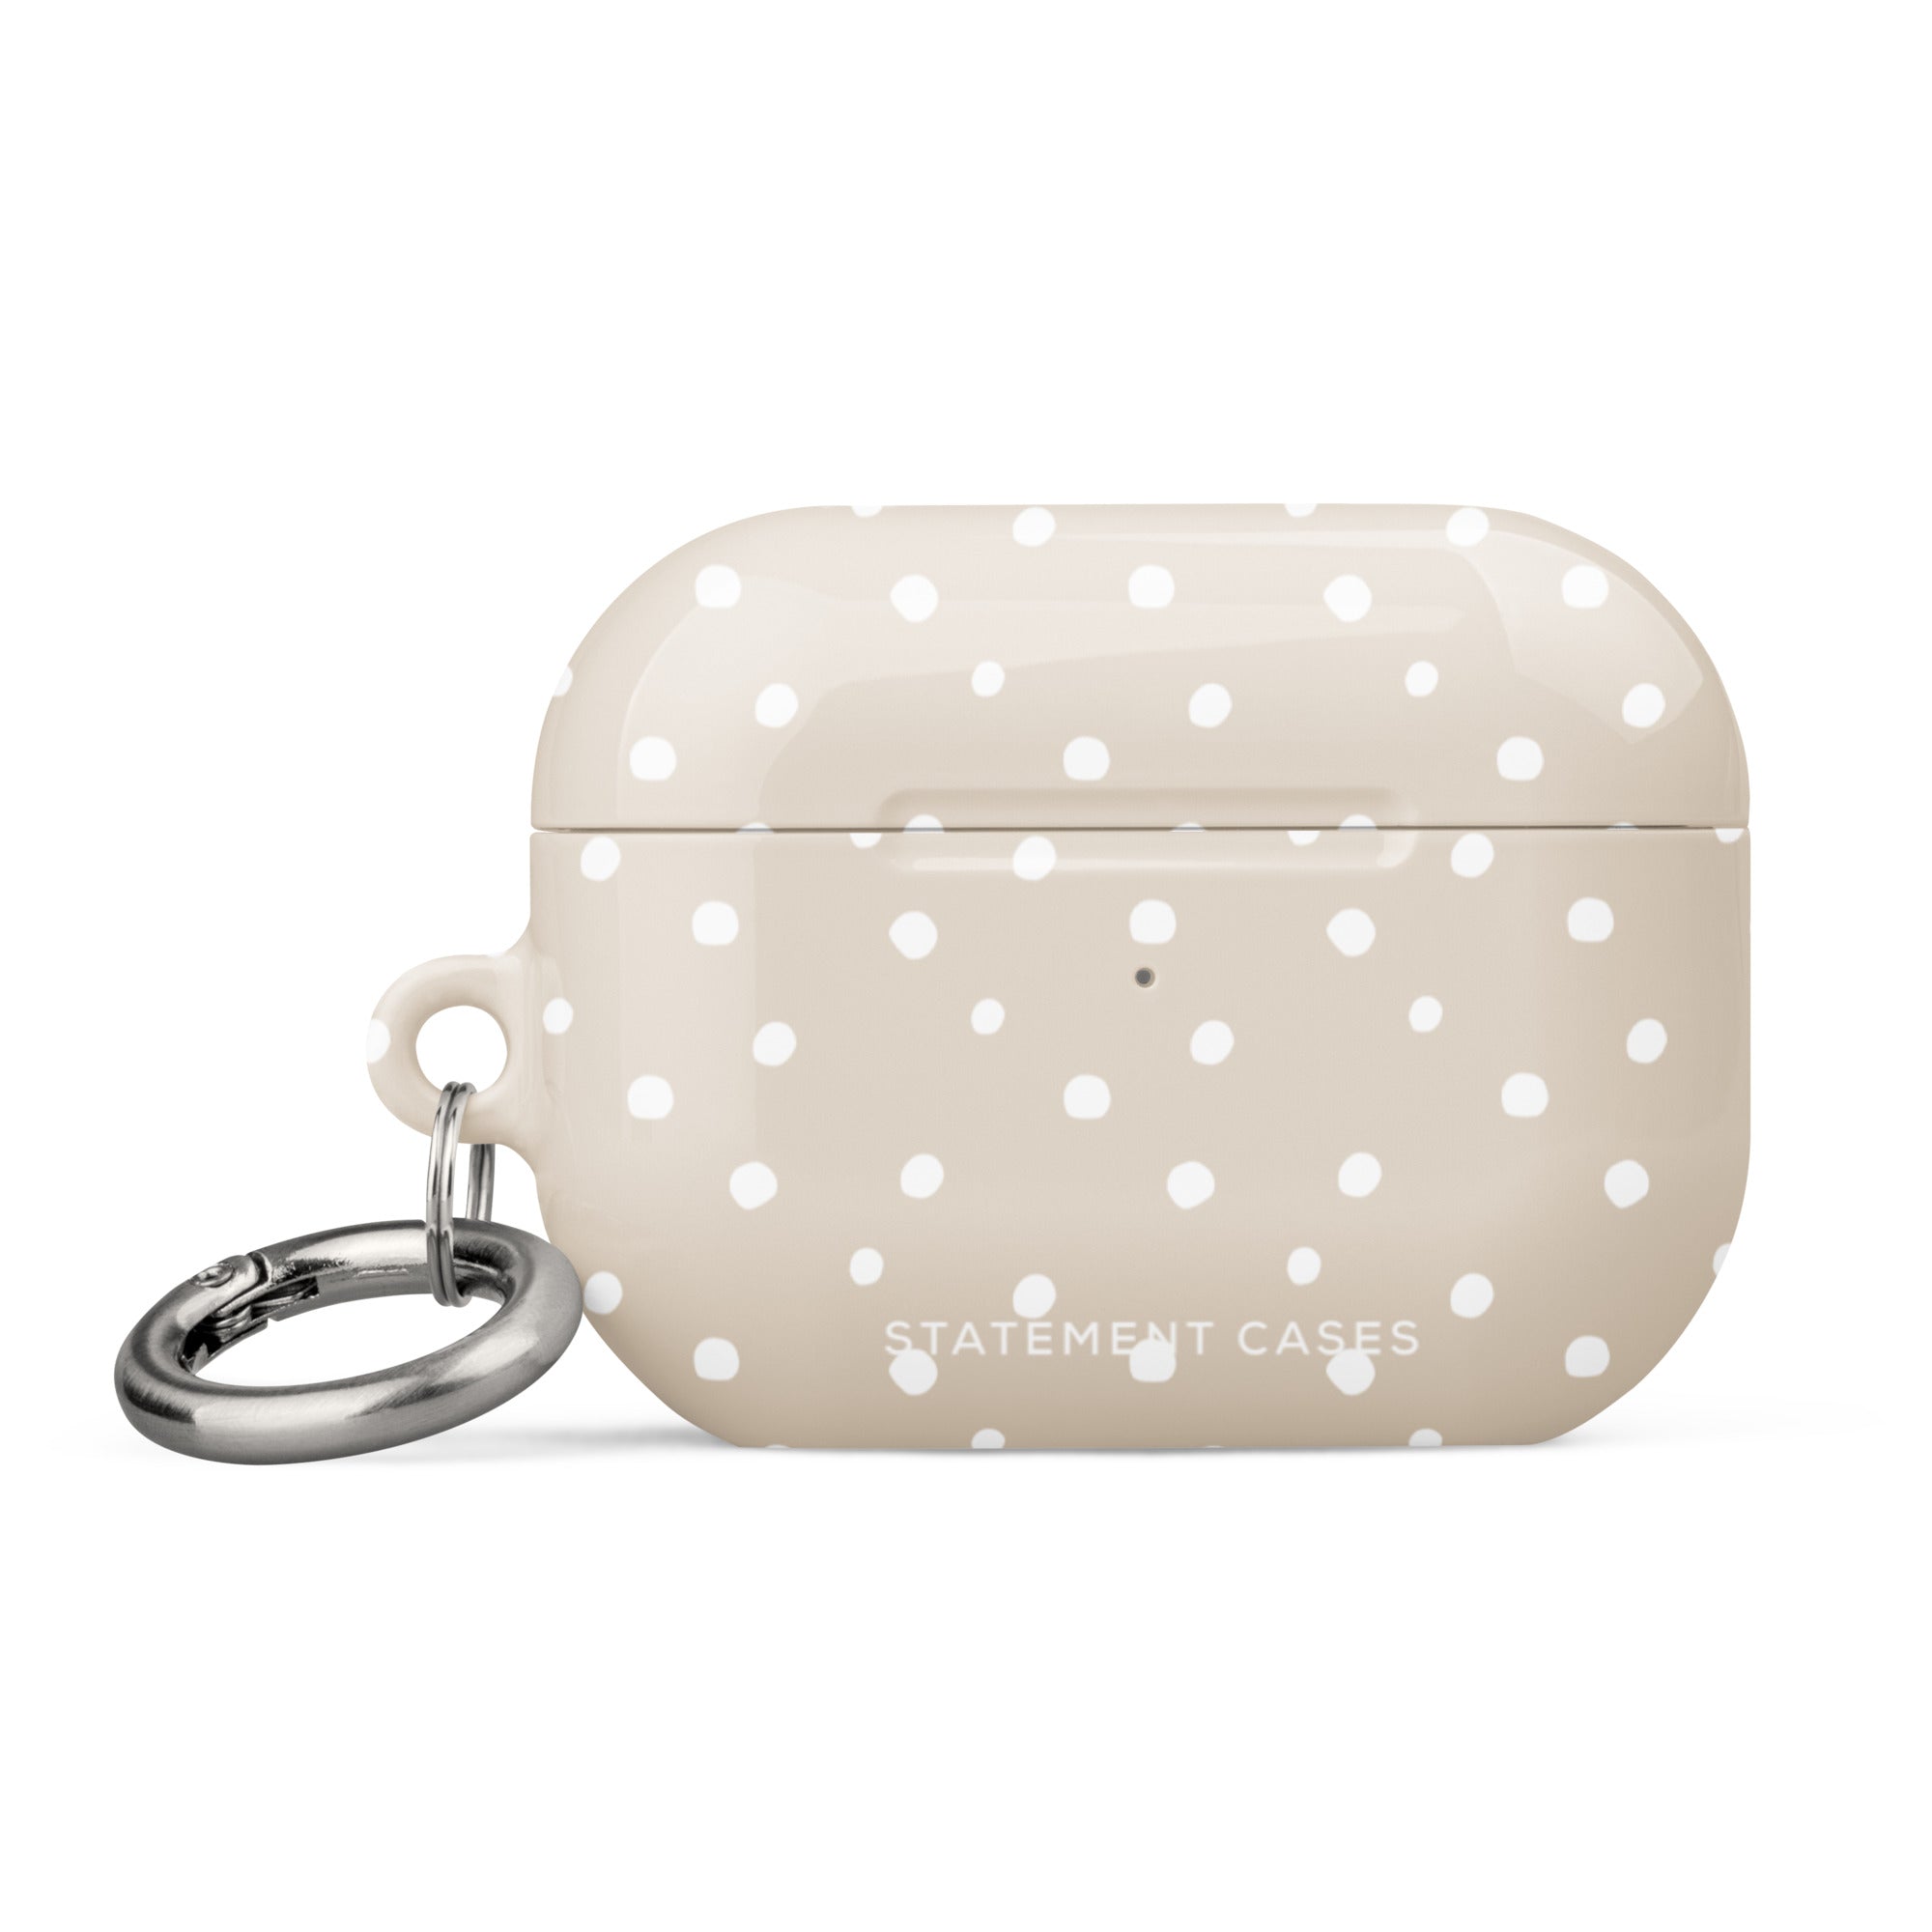 A beige Classic Nude for AirPods Pro Gen 2 case with white polka dots and a small metal carabiner attached to the side, displaying the brand text "Statement Cases.